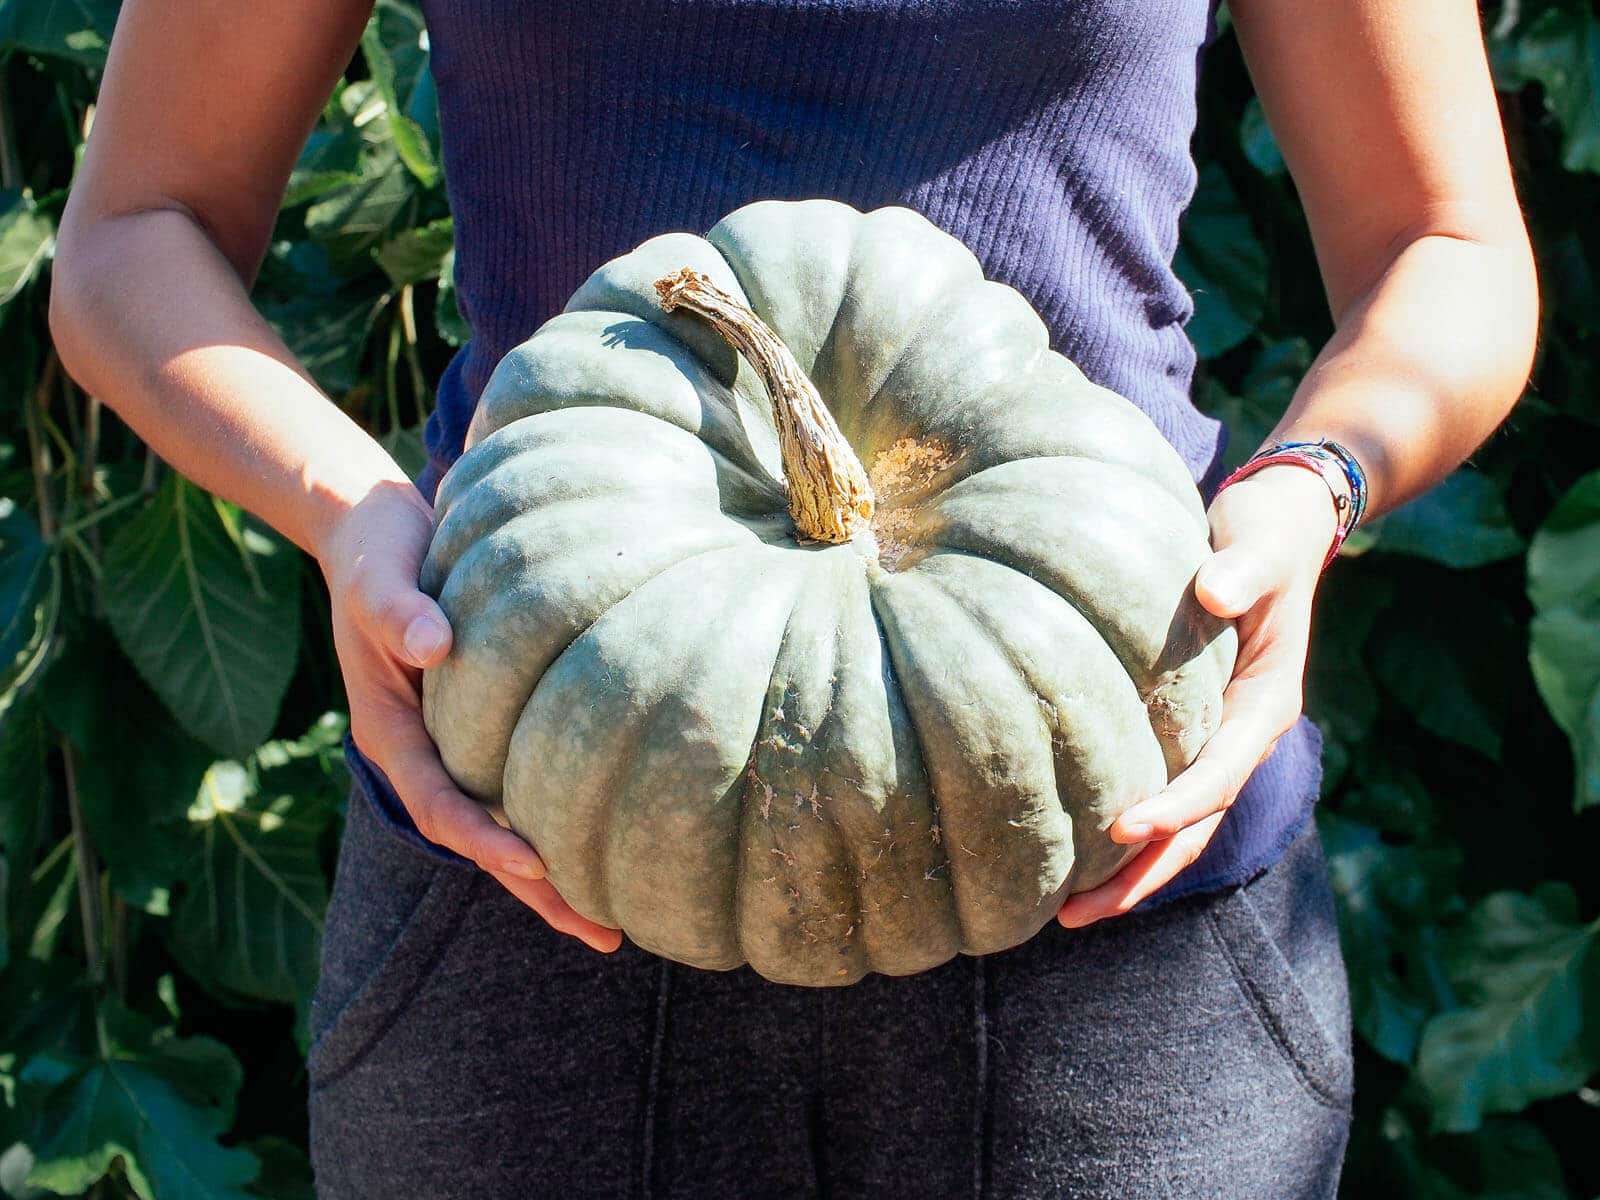 Handle your winter squash gently